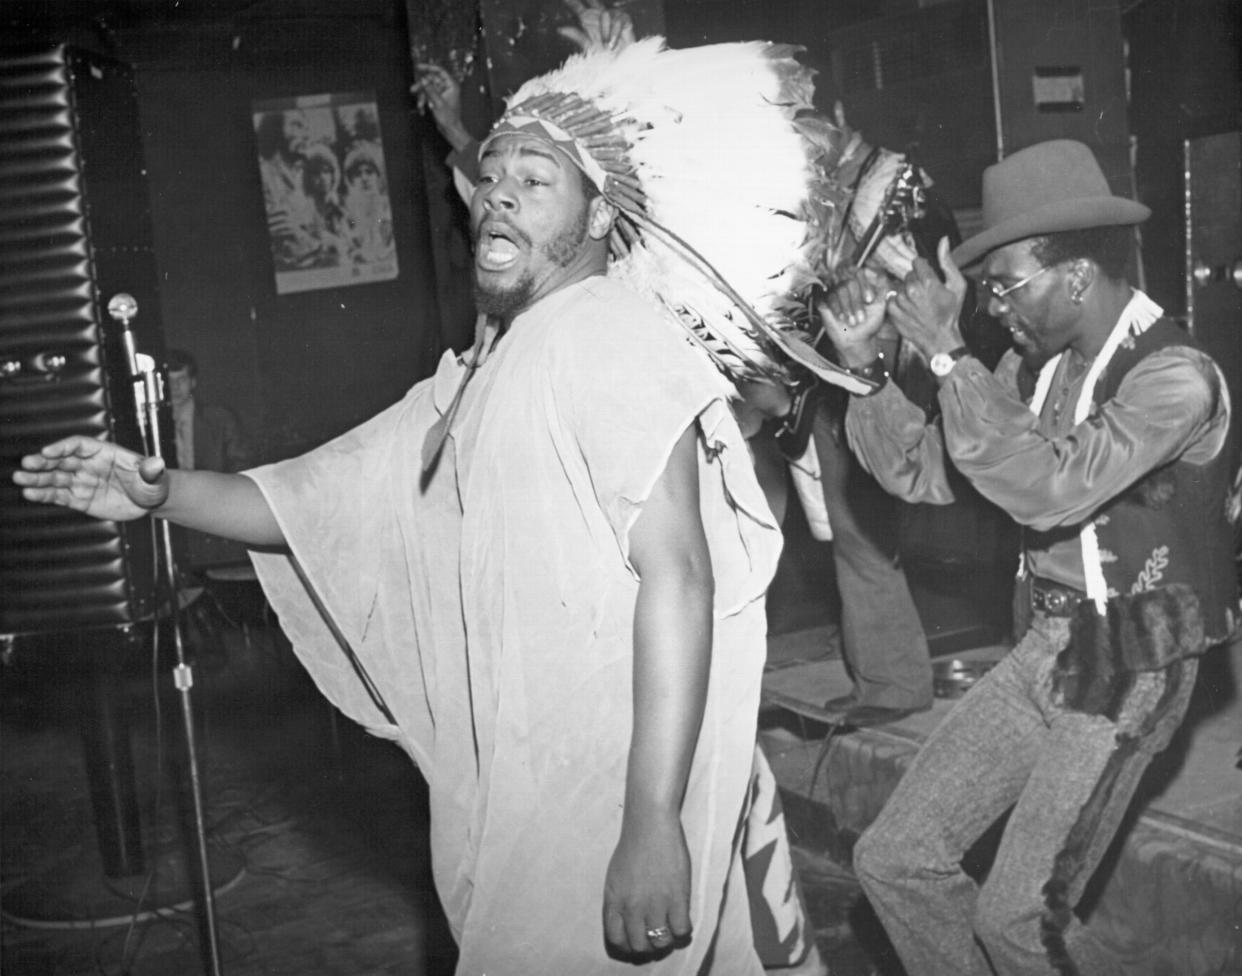 George Clinton (Photo by Michael Ochs Archives/Getty Images)